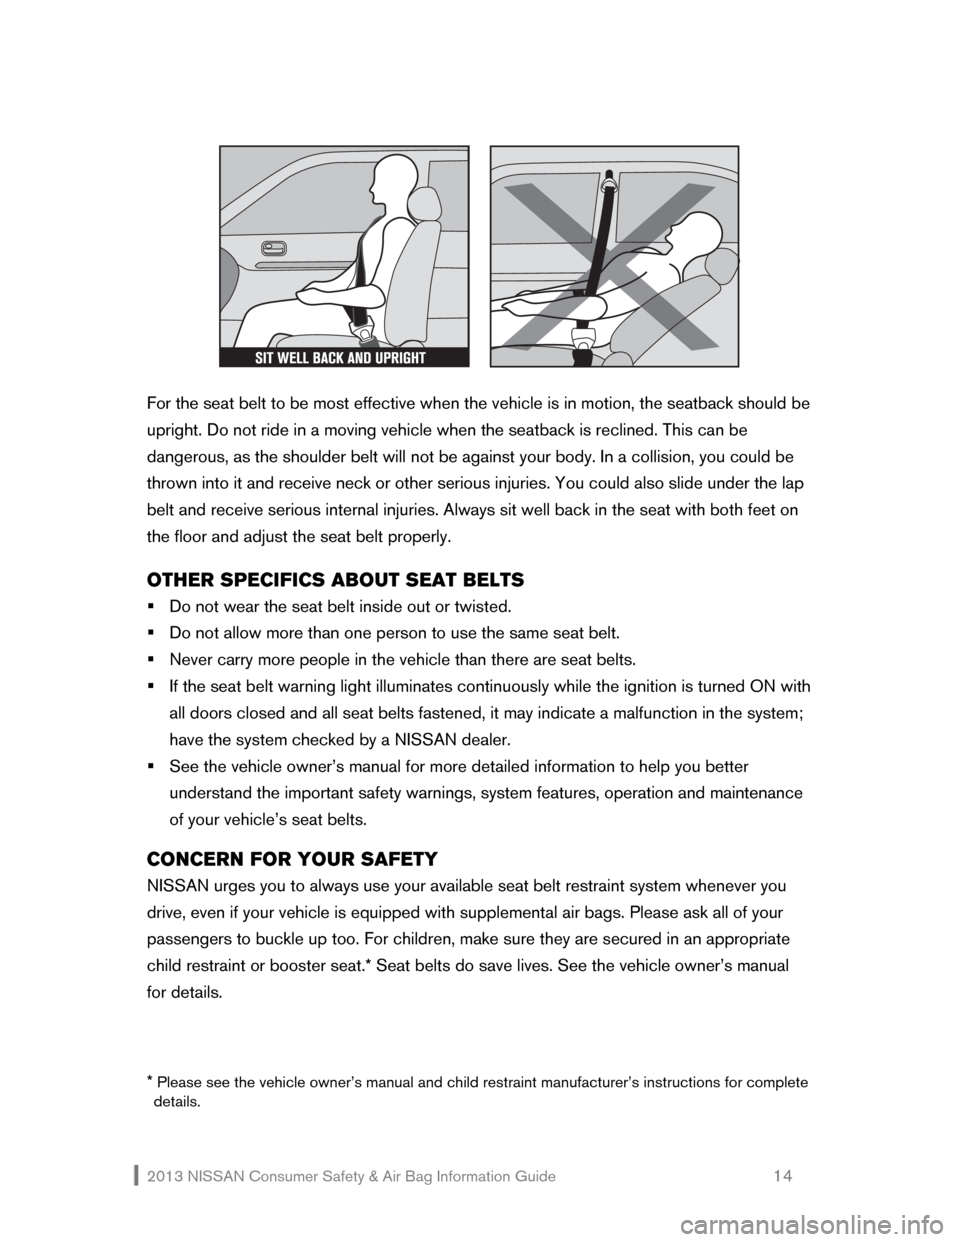 NISSAN MURANO 2013 2.G Consumer Safety Air Bag Information Guide 2013 NISSAN Consumer Safety & Air Bag Information Guide                                                   14 
 
 
 
For the seat belt to be most effective when the vehicle is in motion, the seatback s